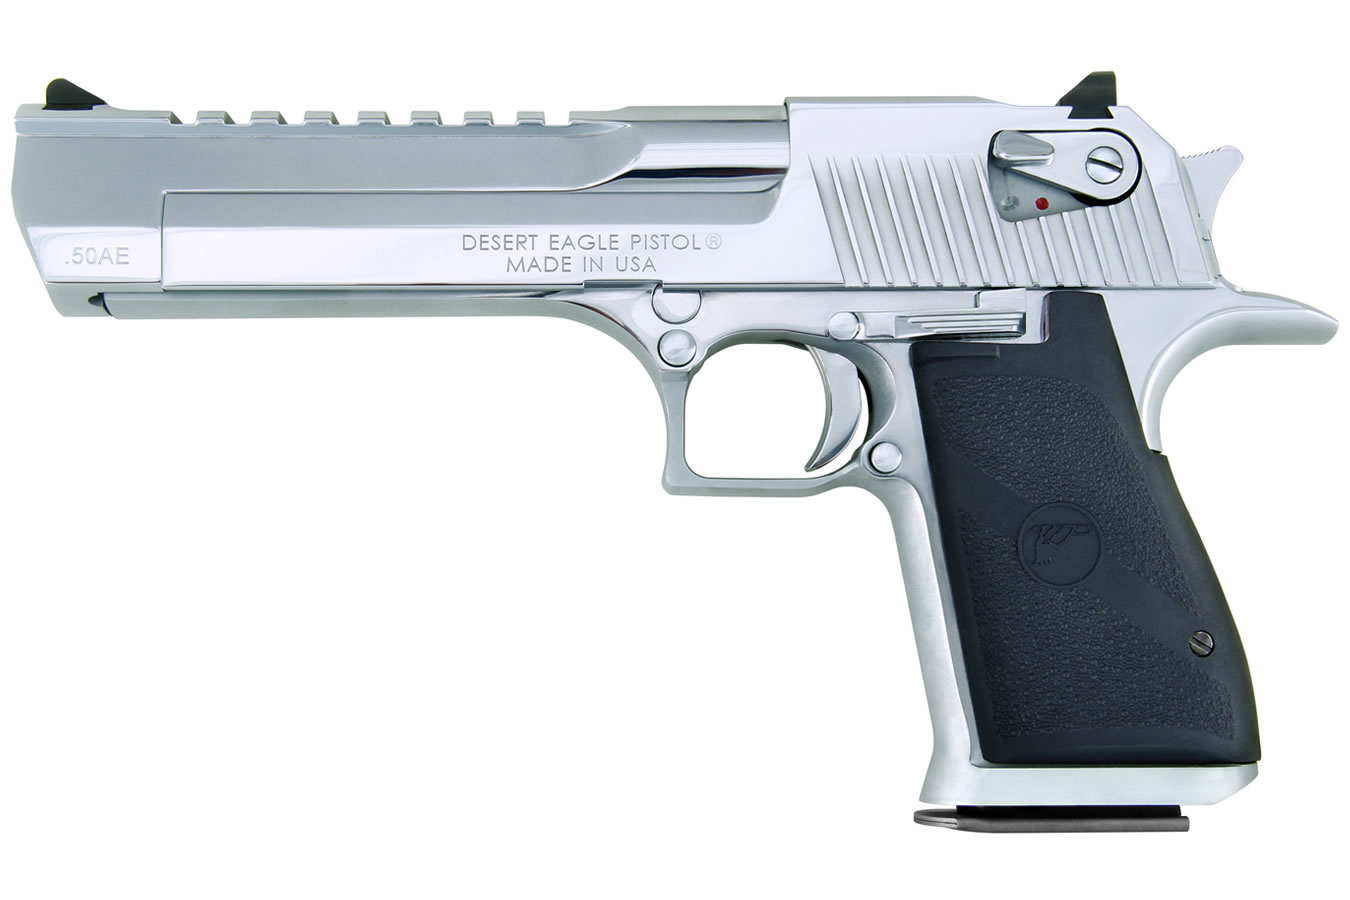 Magnum Research Desert Eagle 50 Ae Mark Xix Pistol With Polished Chrome